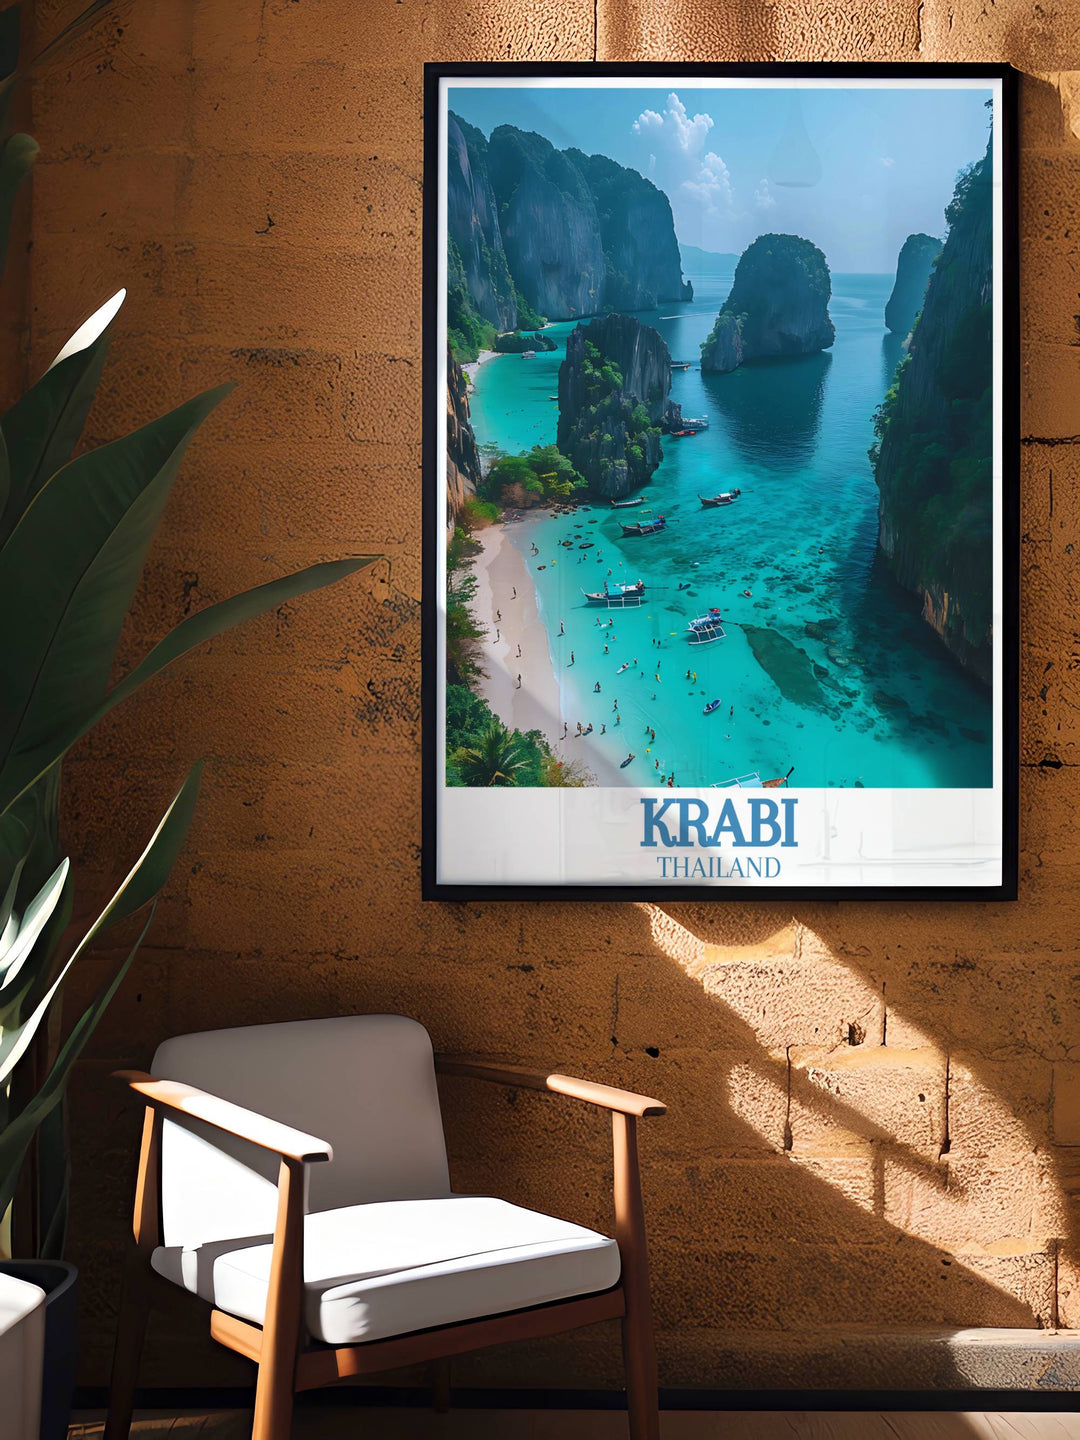 Enjoy the serene beauty of Krabi Island and Railay Beach with this vibrant wall art print capturing the essence of these tropical destinations perfect for adding a splash of color to your home decor and making a great travel gift.